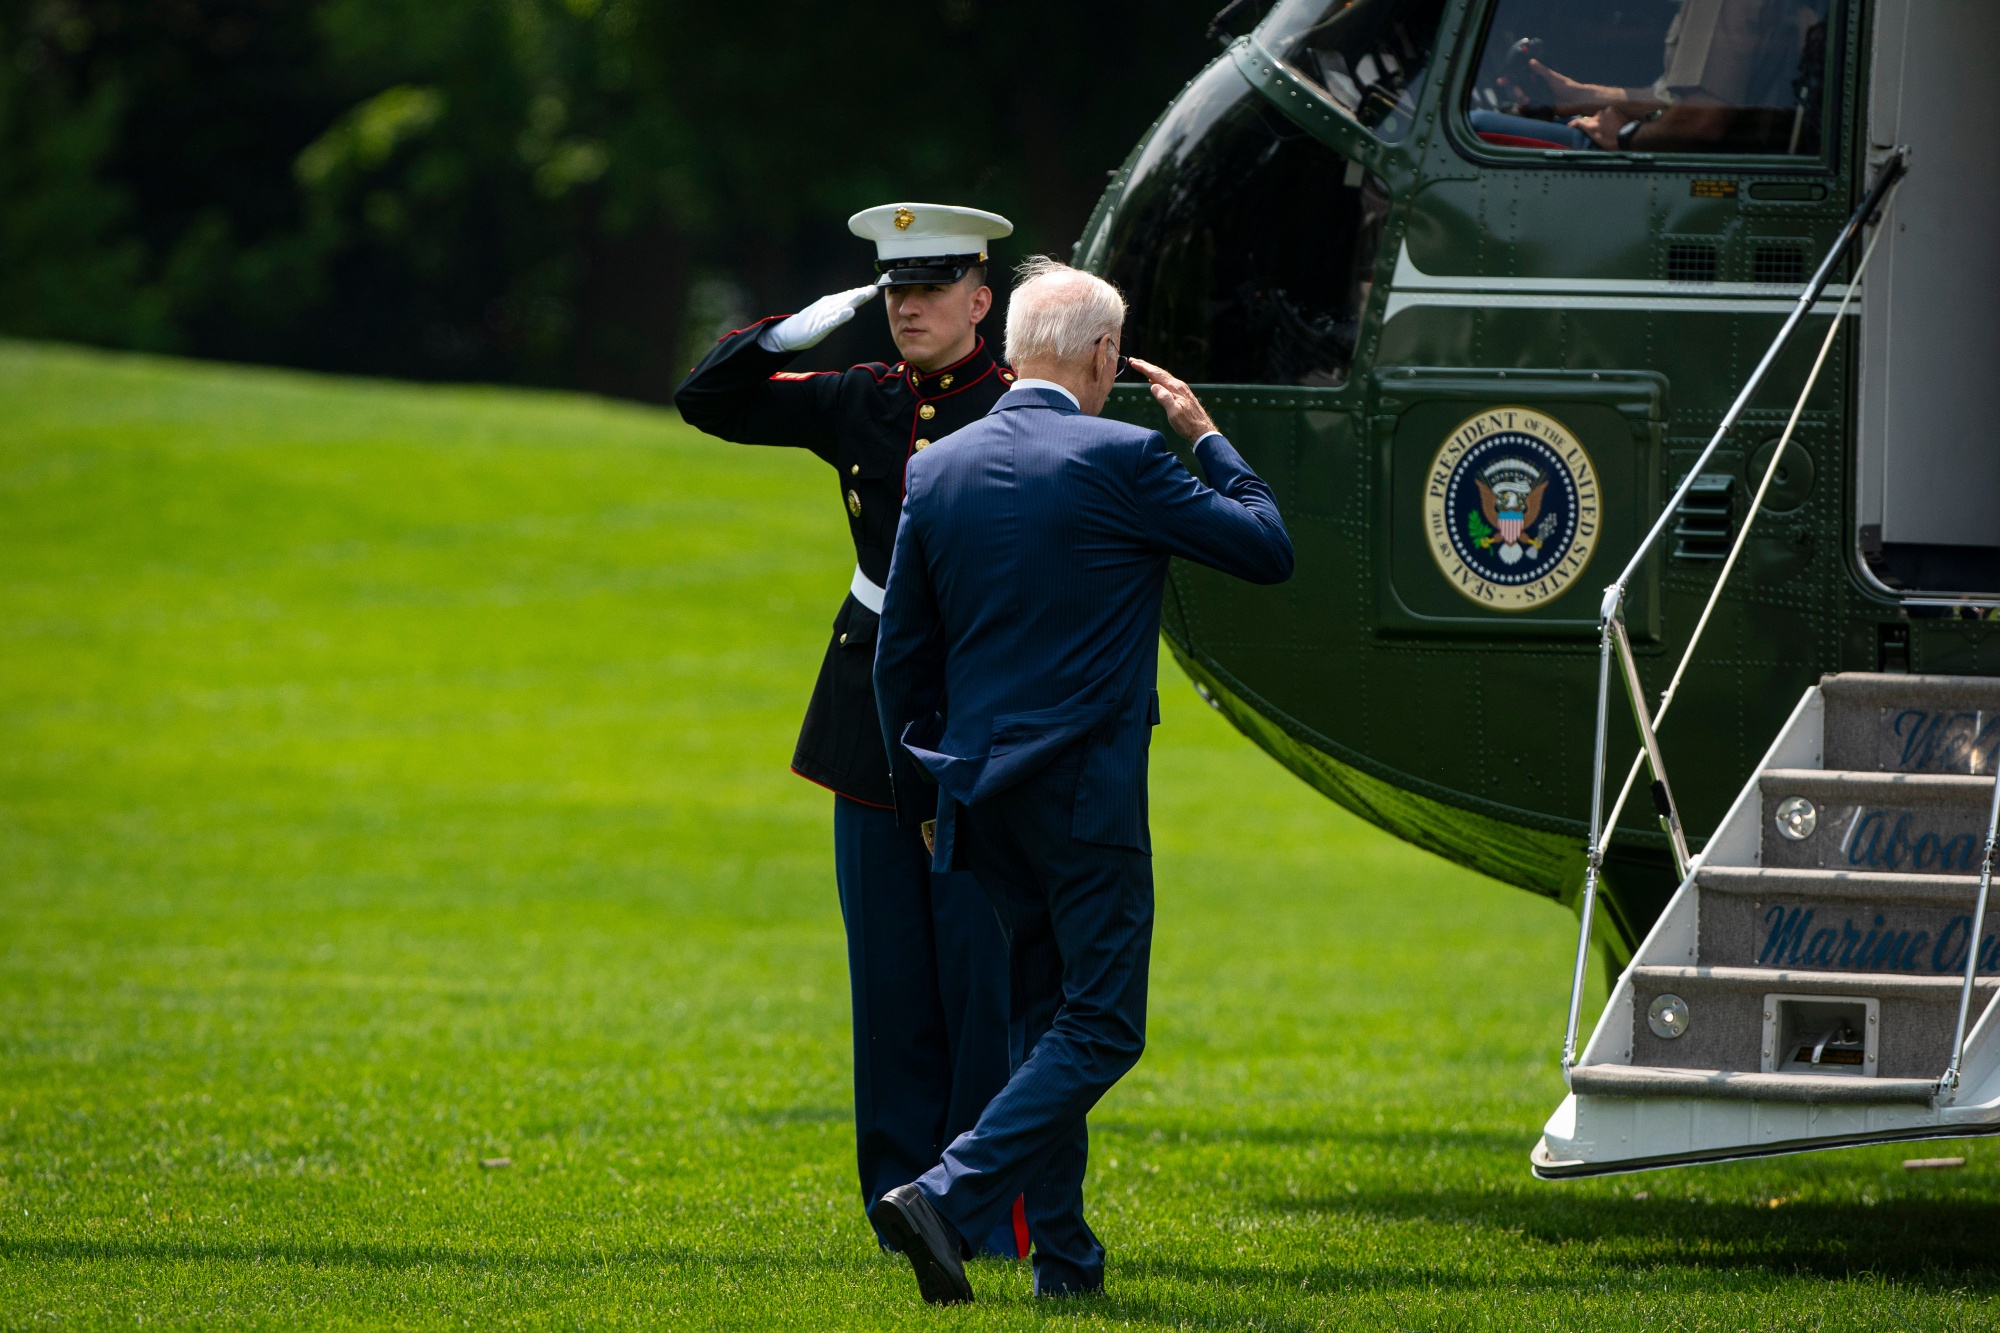 US President Joe Biden boards Marine One on the South Lawn of the White House on Wednesday. Biden is scrapping planned stops in Australia and Papua New Guinea following his trip to Japan for the Group of Seven meeting so he can return for negotiations with Republicans over raising the debt ceiling.